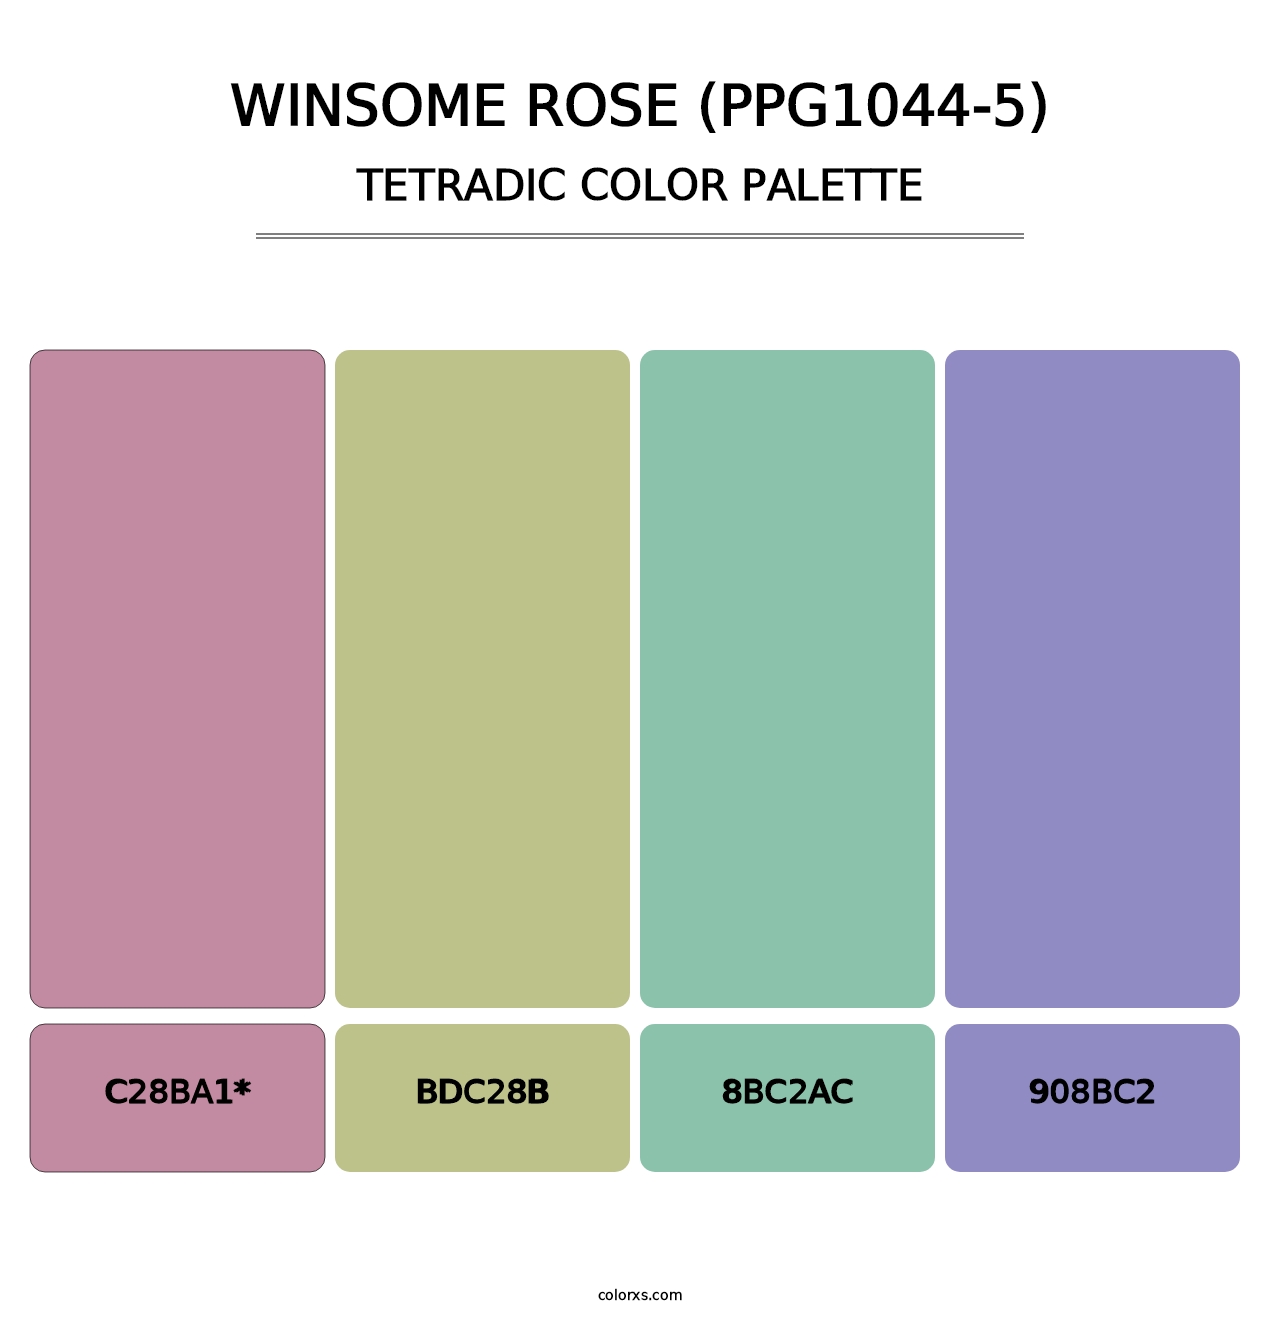 Winsome Rose (PPG1044-5) - Tetradic Color Palette